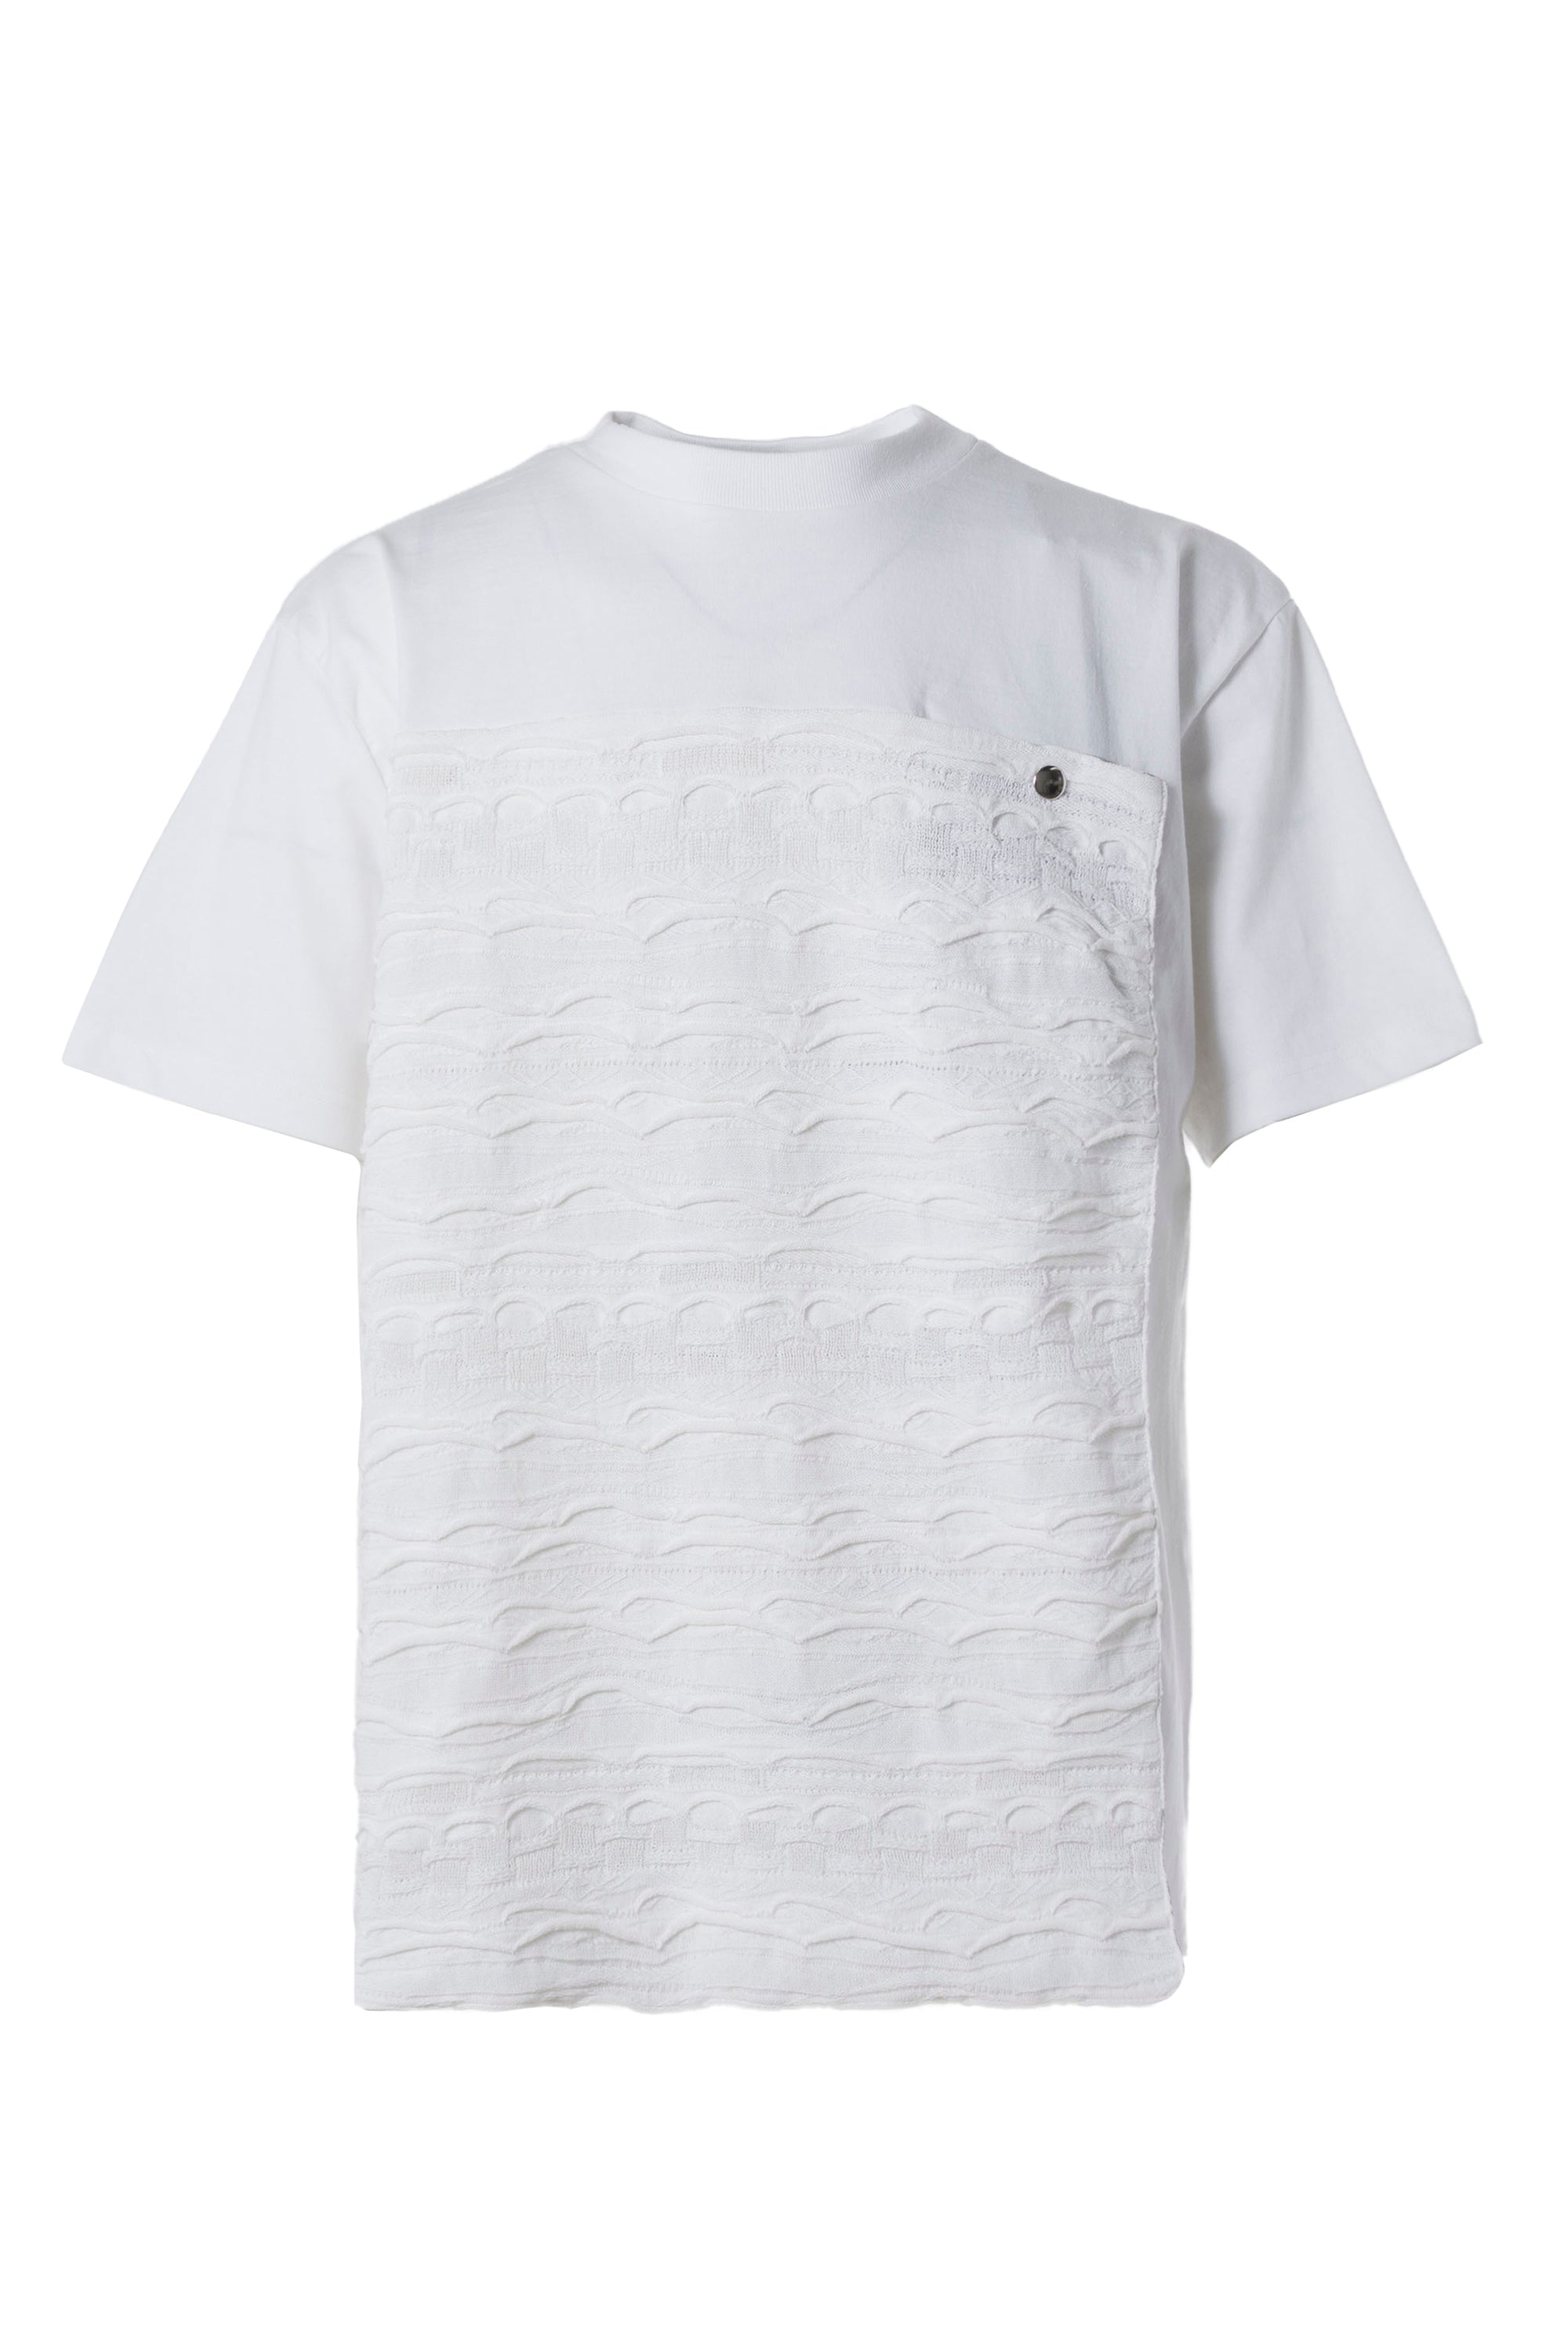 Tamme SS23 3D SUMMER KNIT PANEL S/S TSHIRT / WHT -NUBIAN